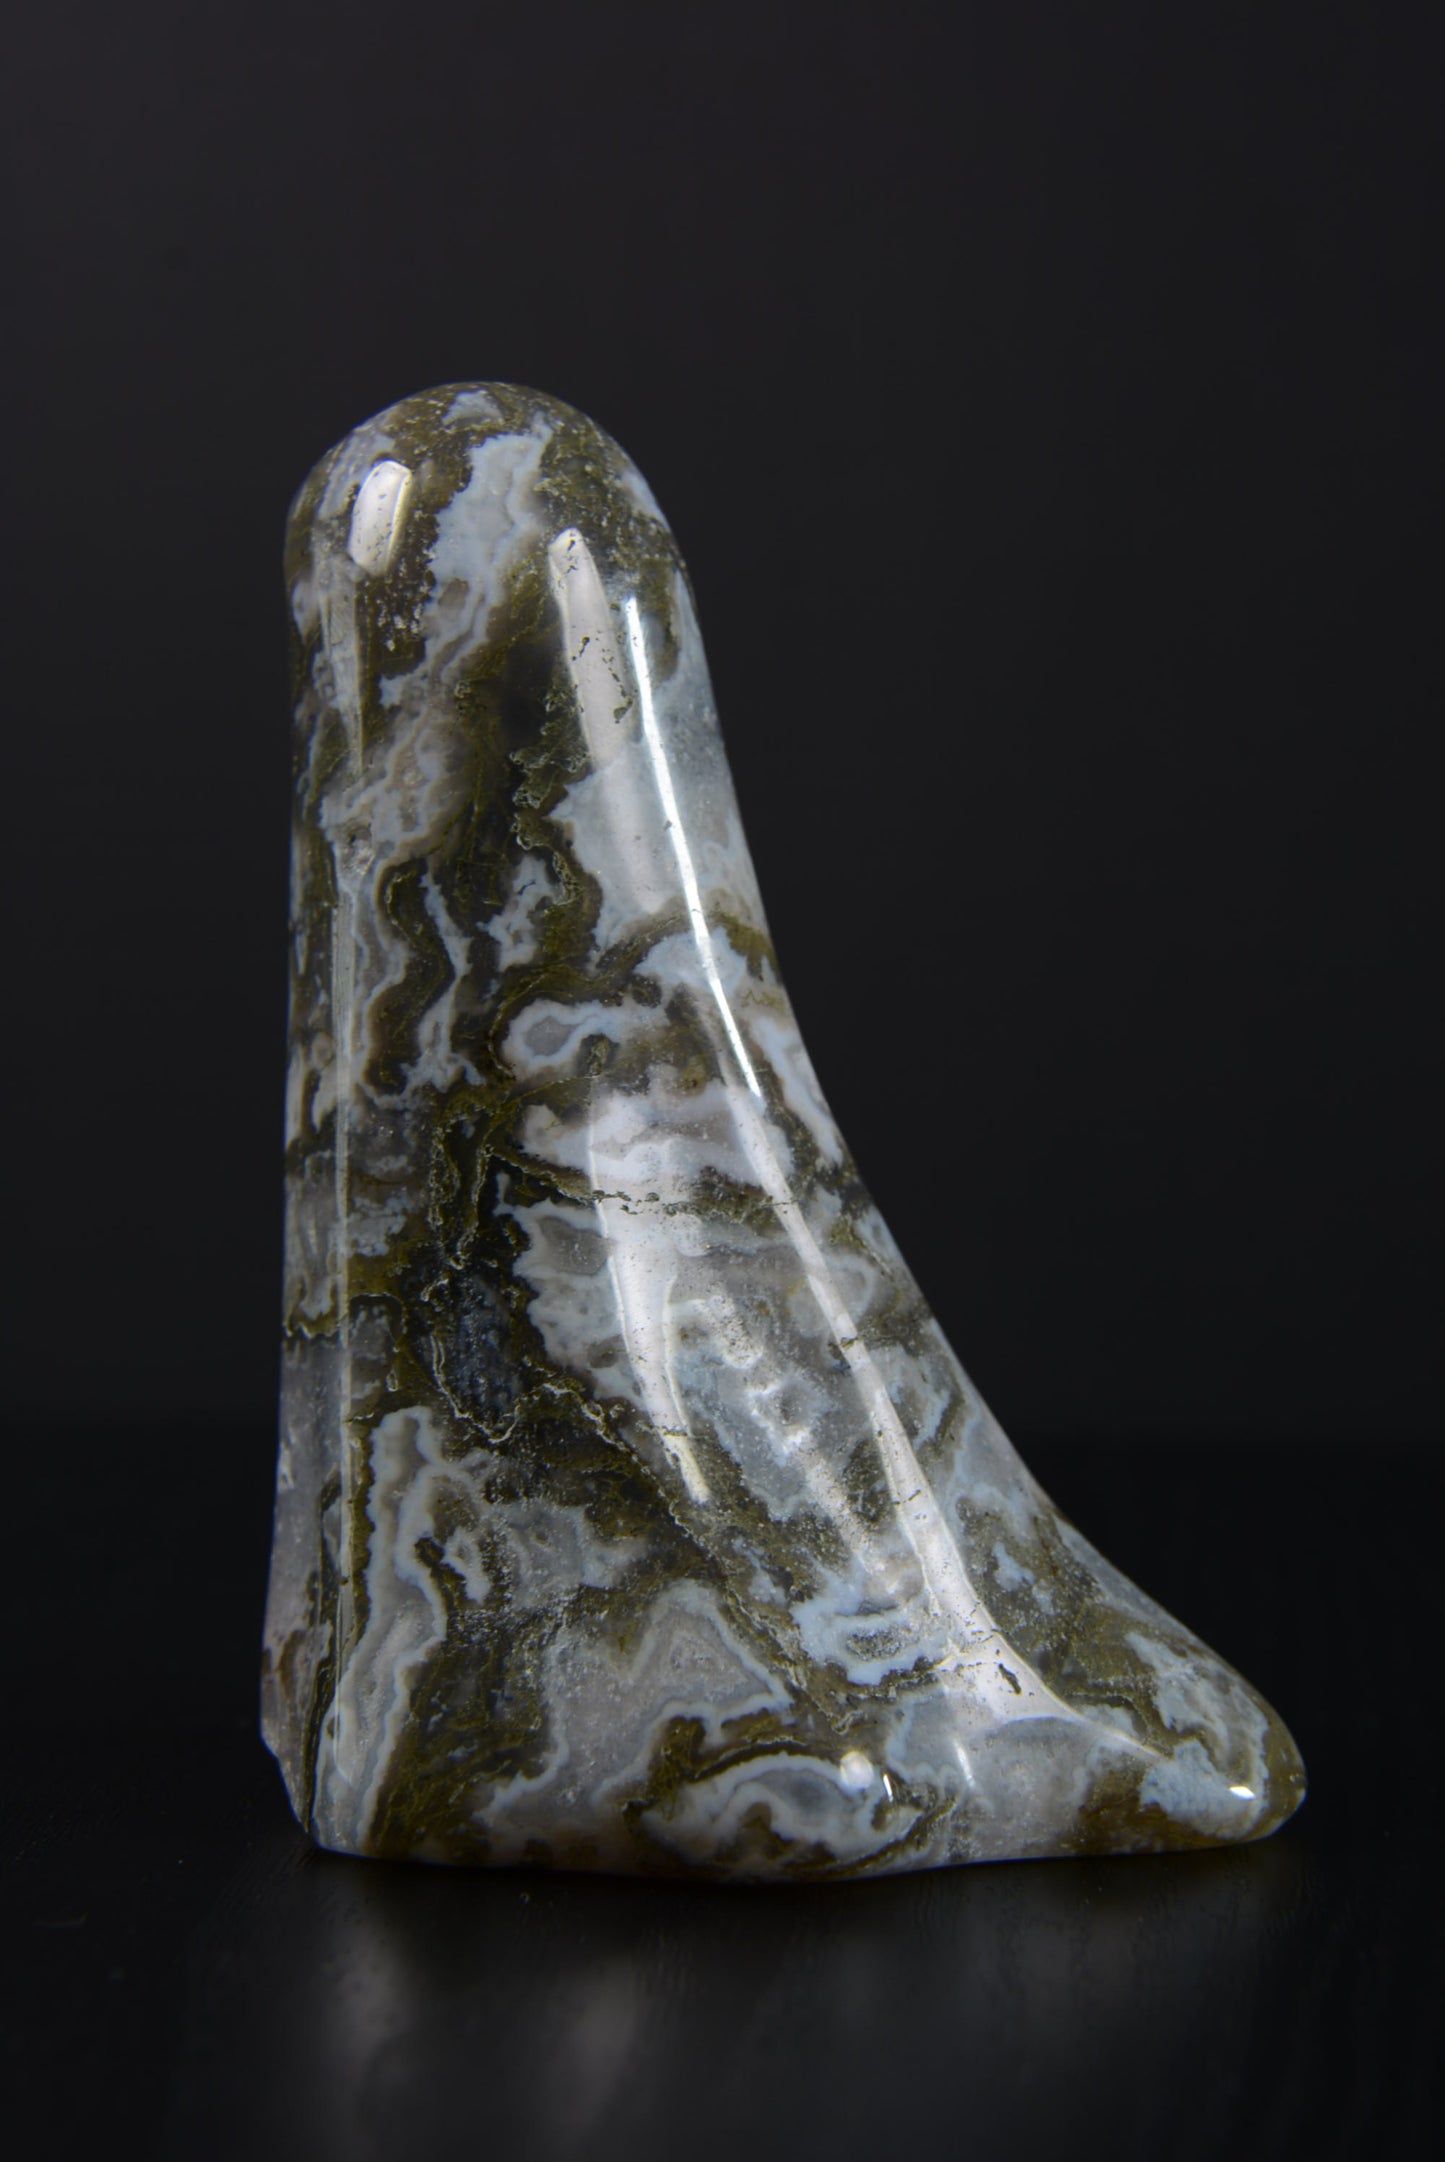 Profile angle of a polished ghost ornament, capturing the exquisite contours and the intricate play of light on its natural gemstone surface, emphasizing the ghost's ethereal beauty and craftsmanship.